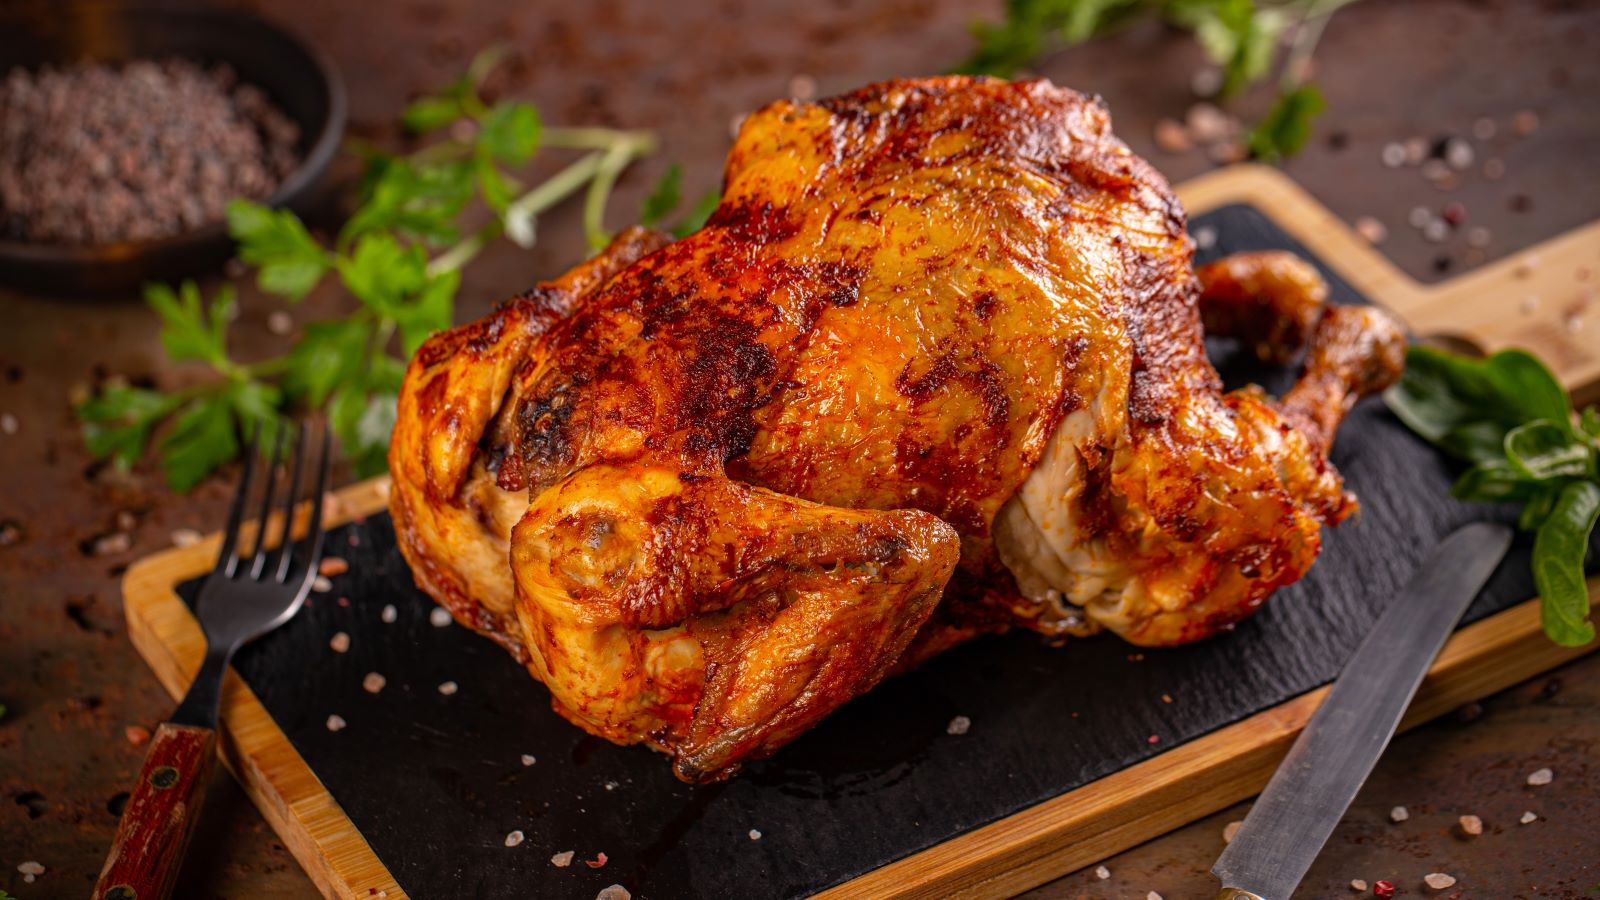 Is a rotisserie chicken as healthy for your family as one you would roast yourself in the oven? We asked a dietitian to weigh in.